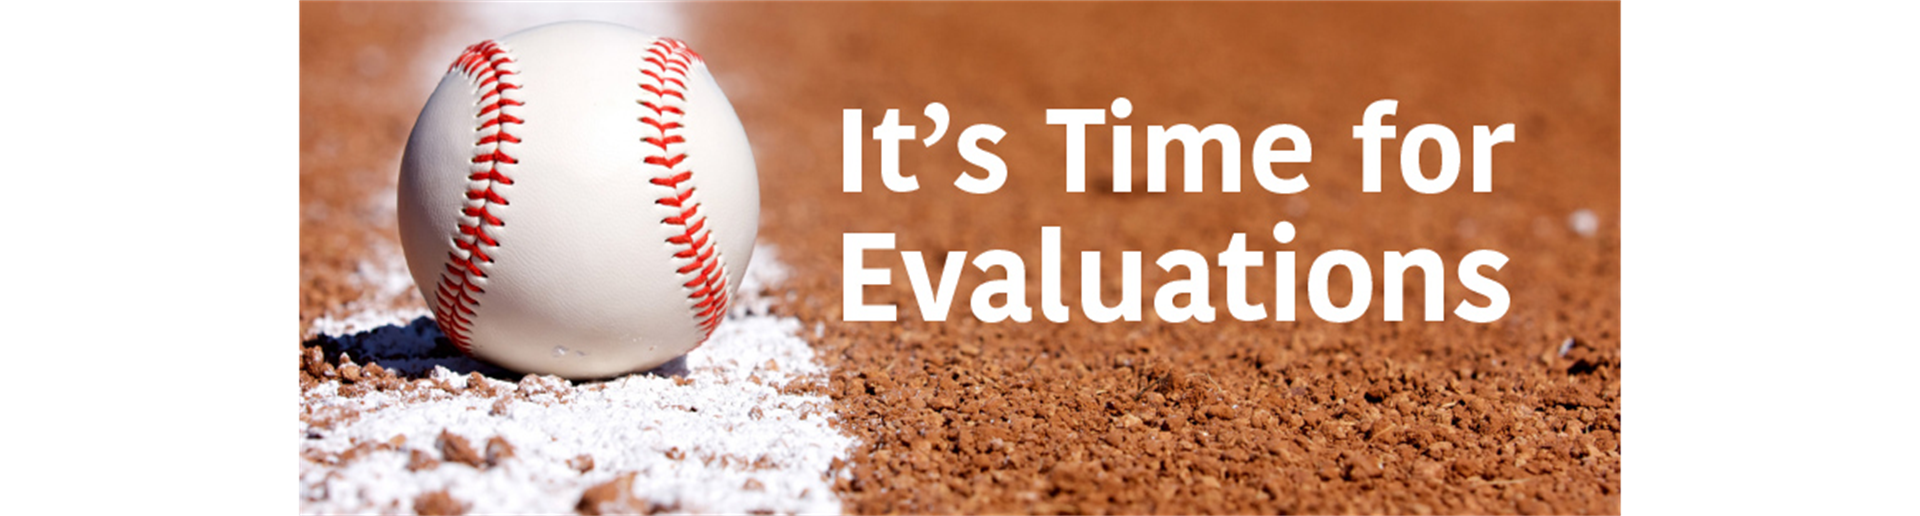 Fall Evaluations, Saturday, Aug. 13 st The Yard at Wire Park